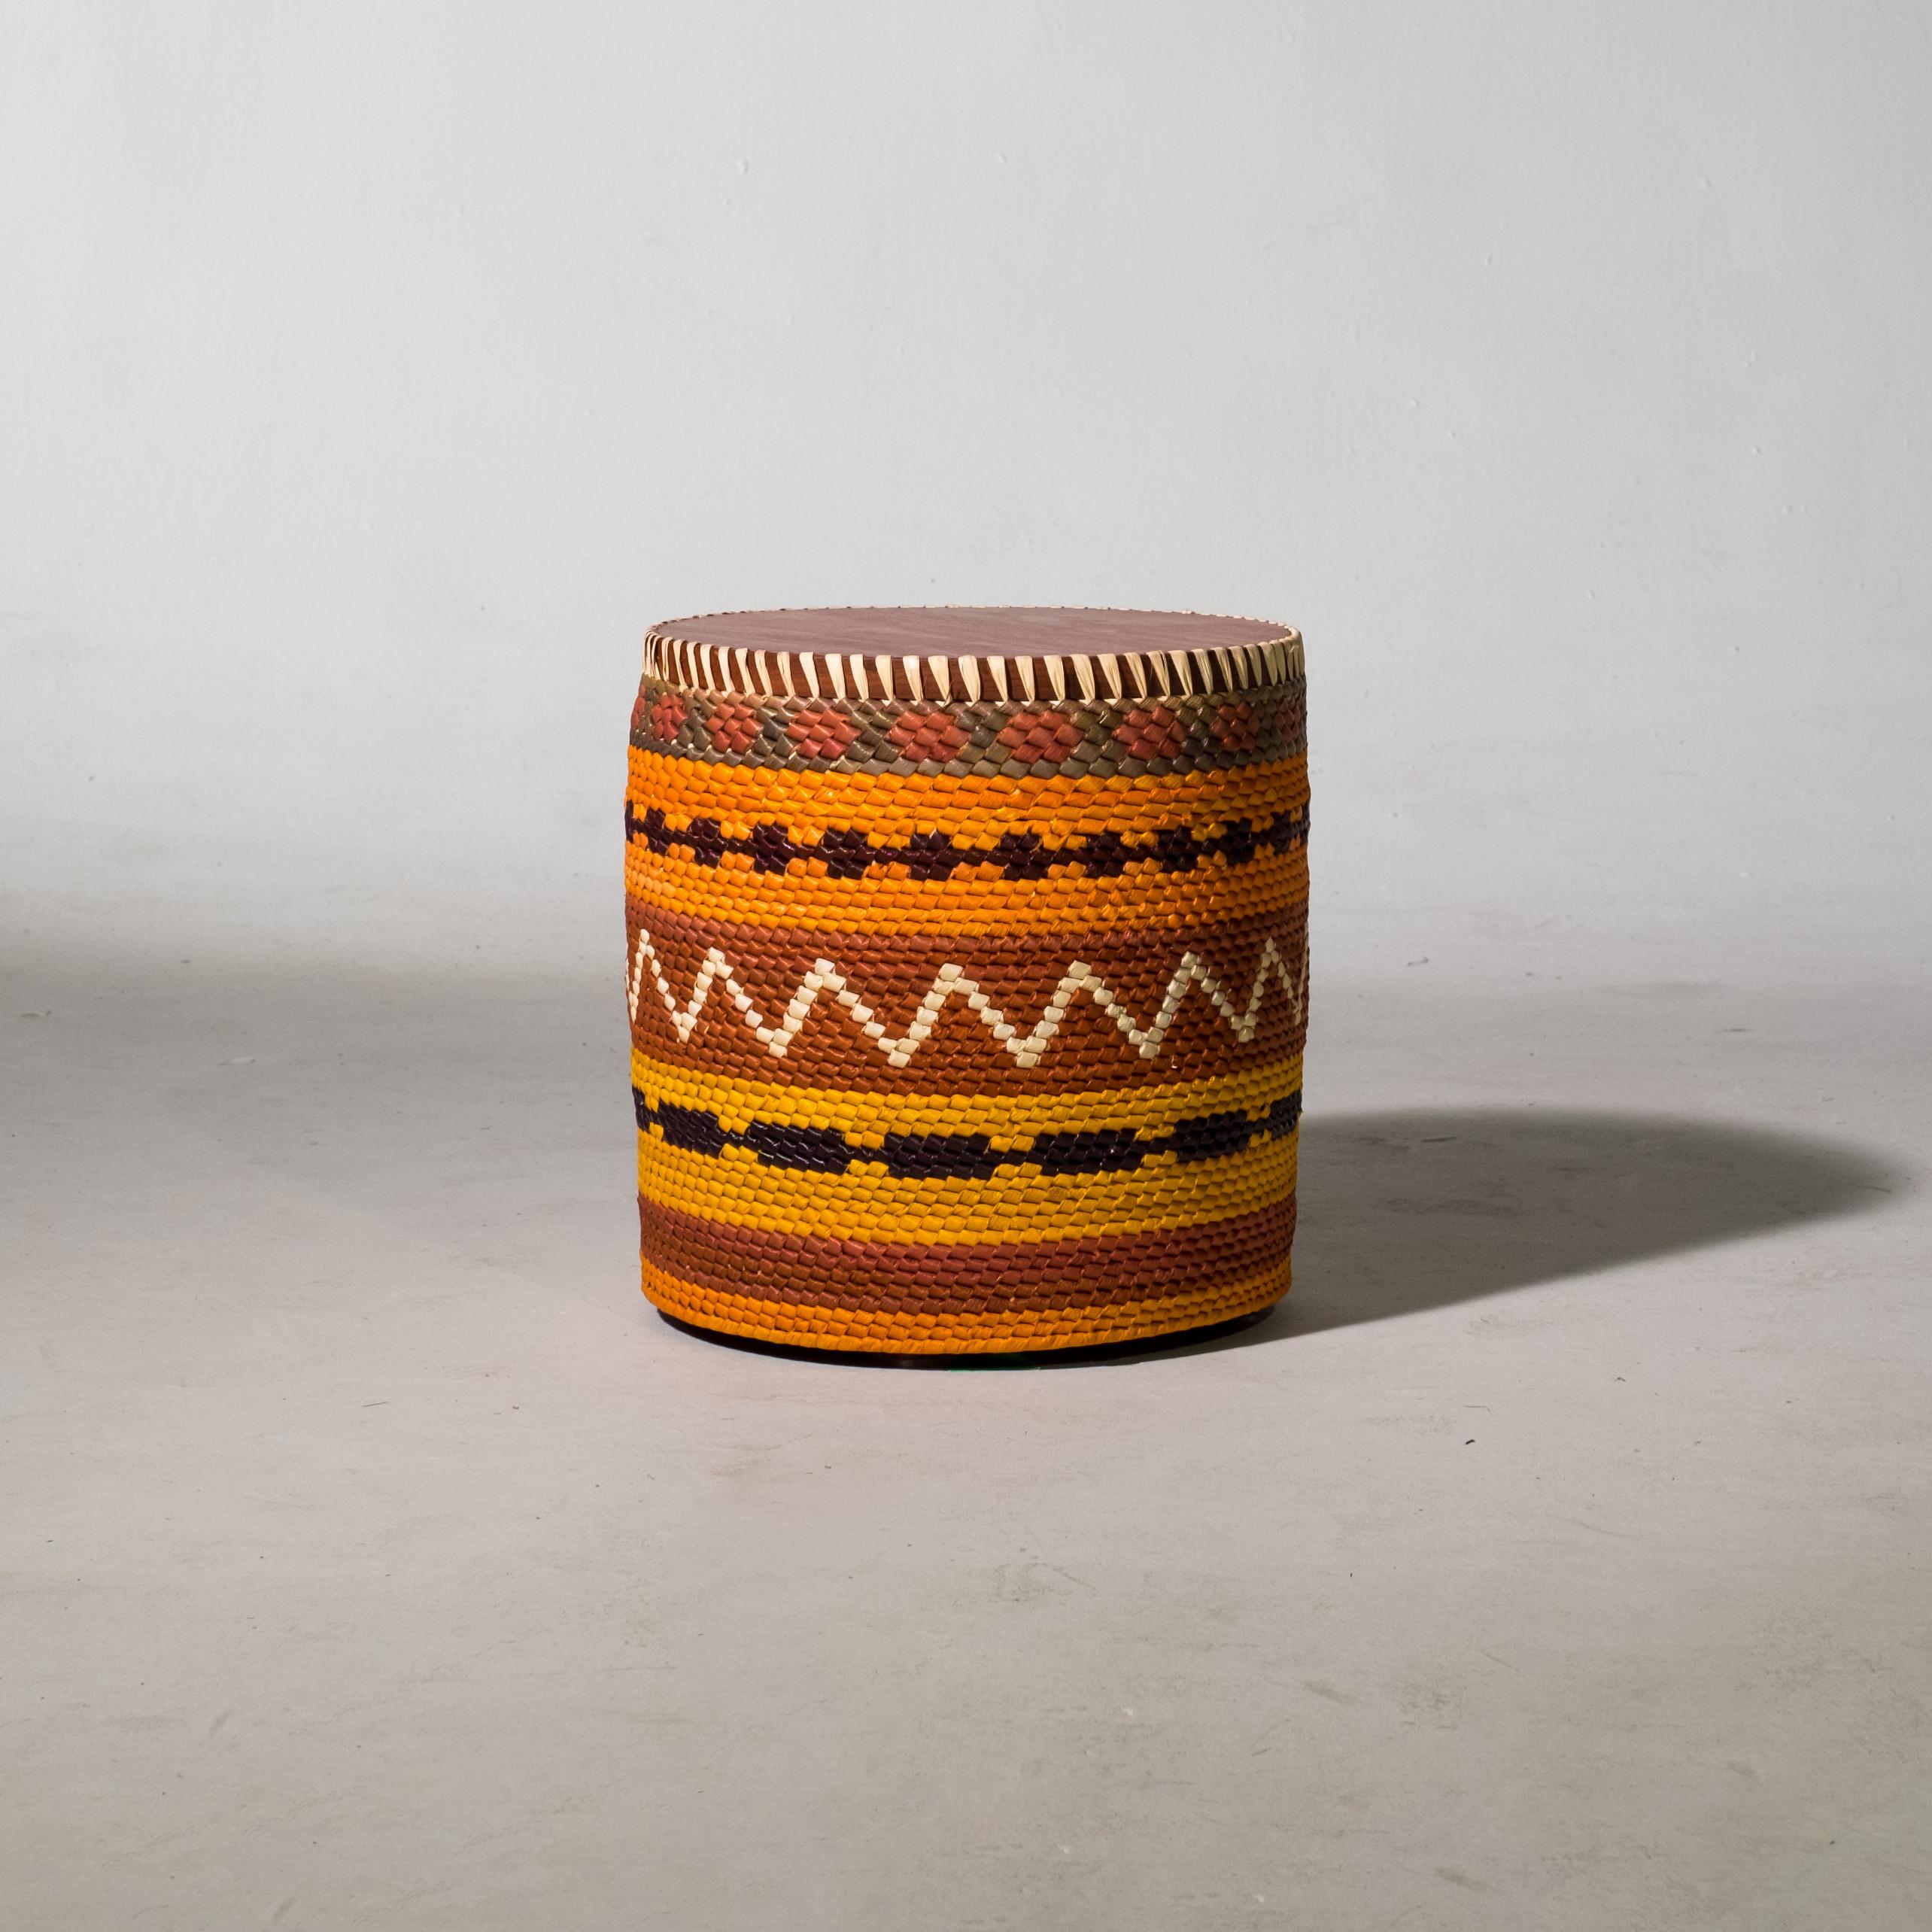 Brazilian Palafitas side table S: handcrafted in Brazil with tucumã straw and solid wood For Sale